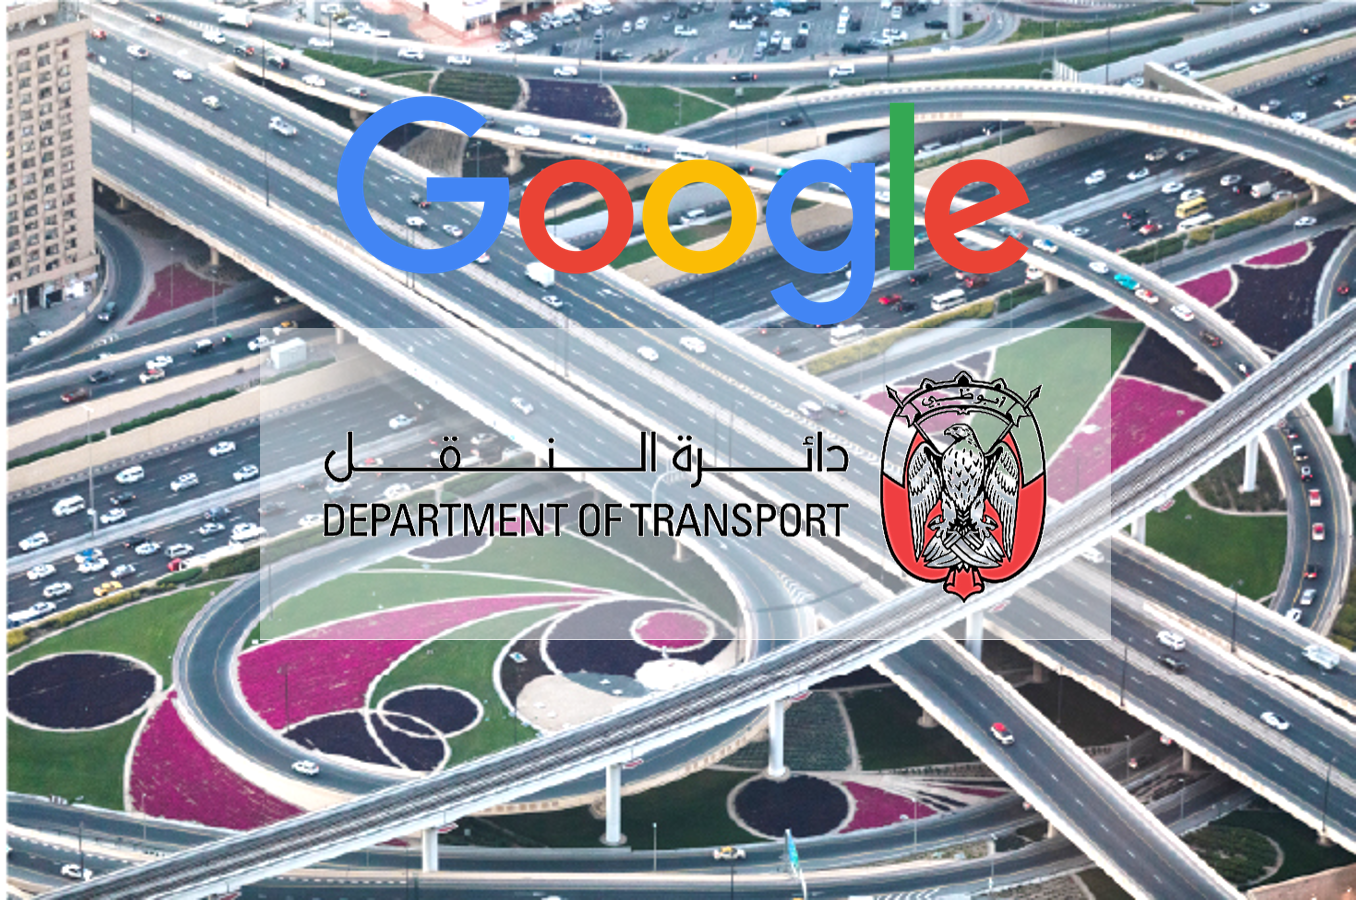 Google helps Abu Dhabi's Transport Authority solve its traffic problem using machine learning and AI-powered traffic management systems.